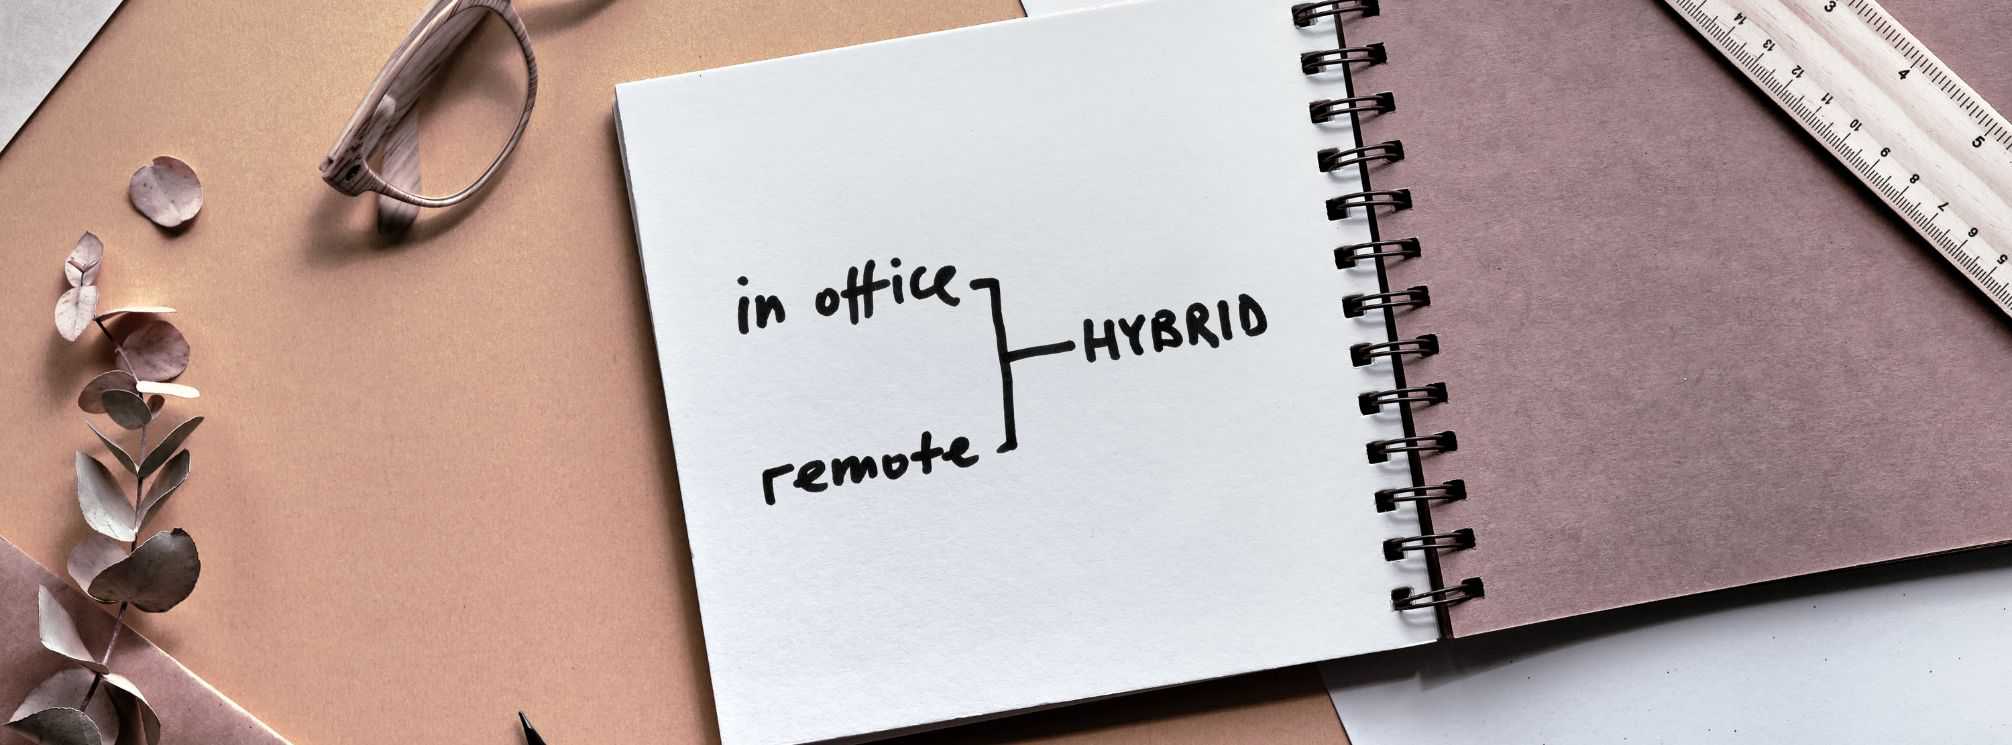 notebook that shows the words "in office" and "remote" connected by lines that lead to "hybrid"